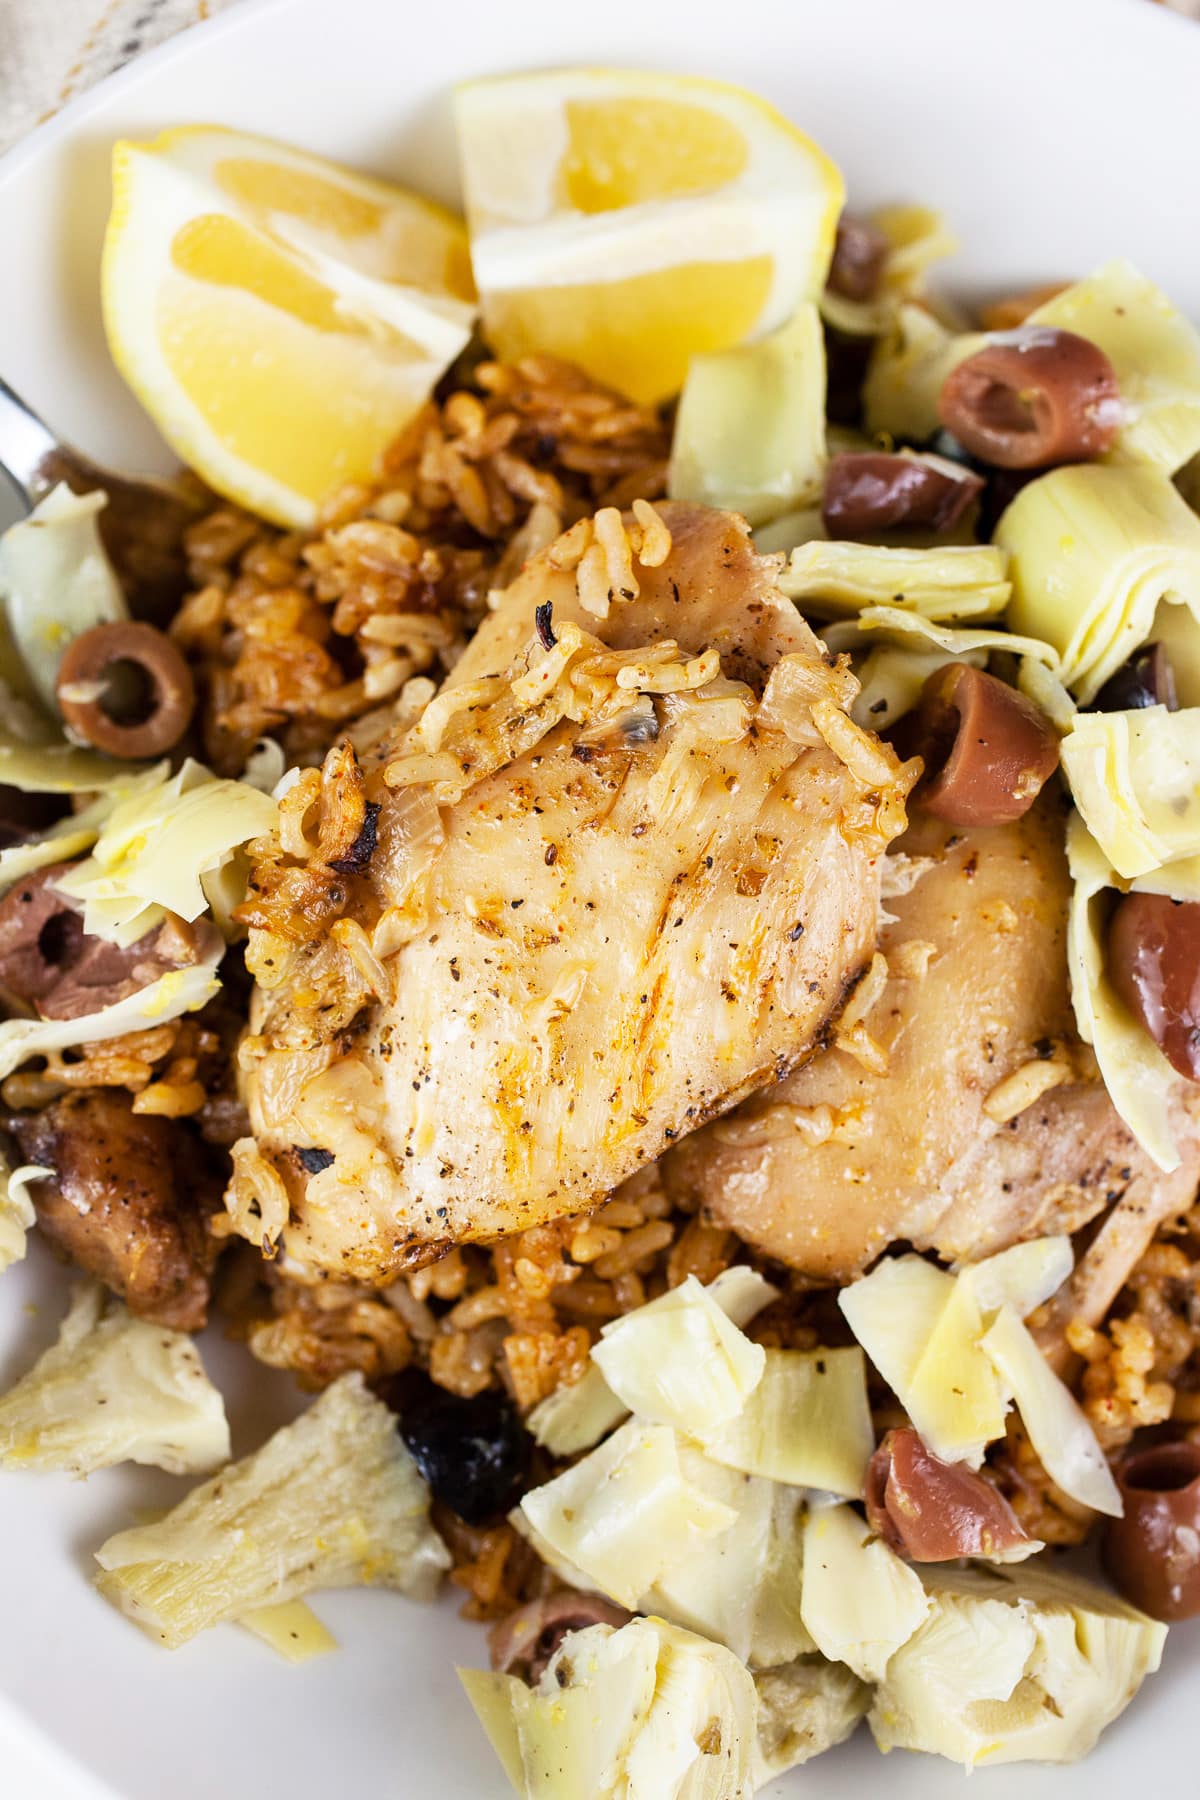 Chicken thighs and rice with artichokes, olives, and lemon wedges in white bowl.